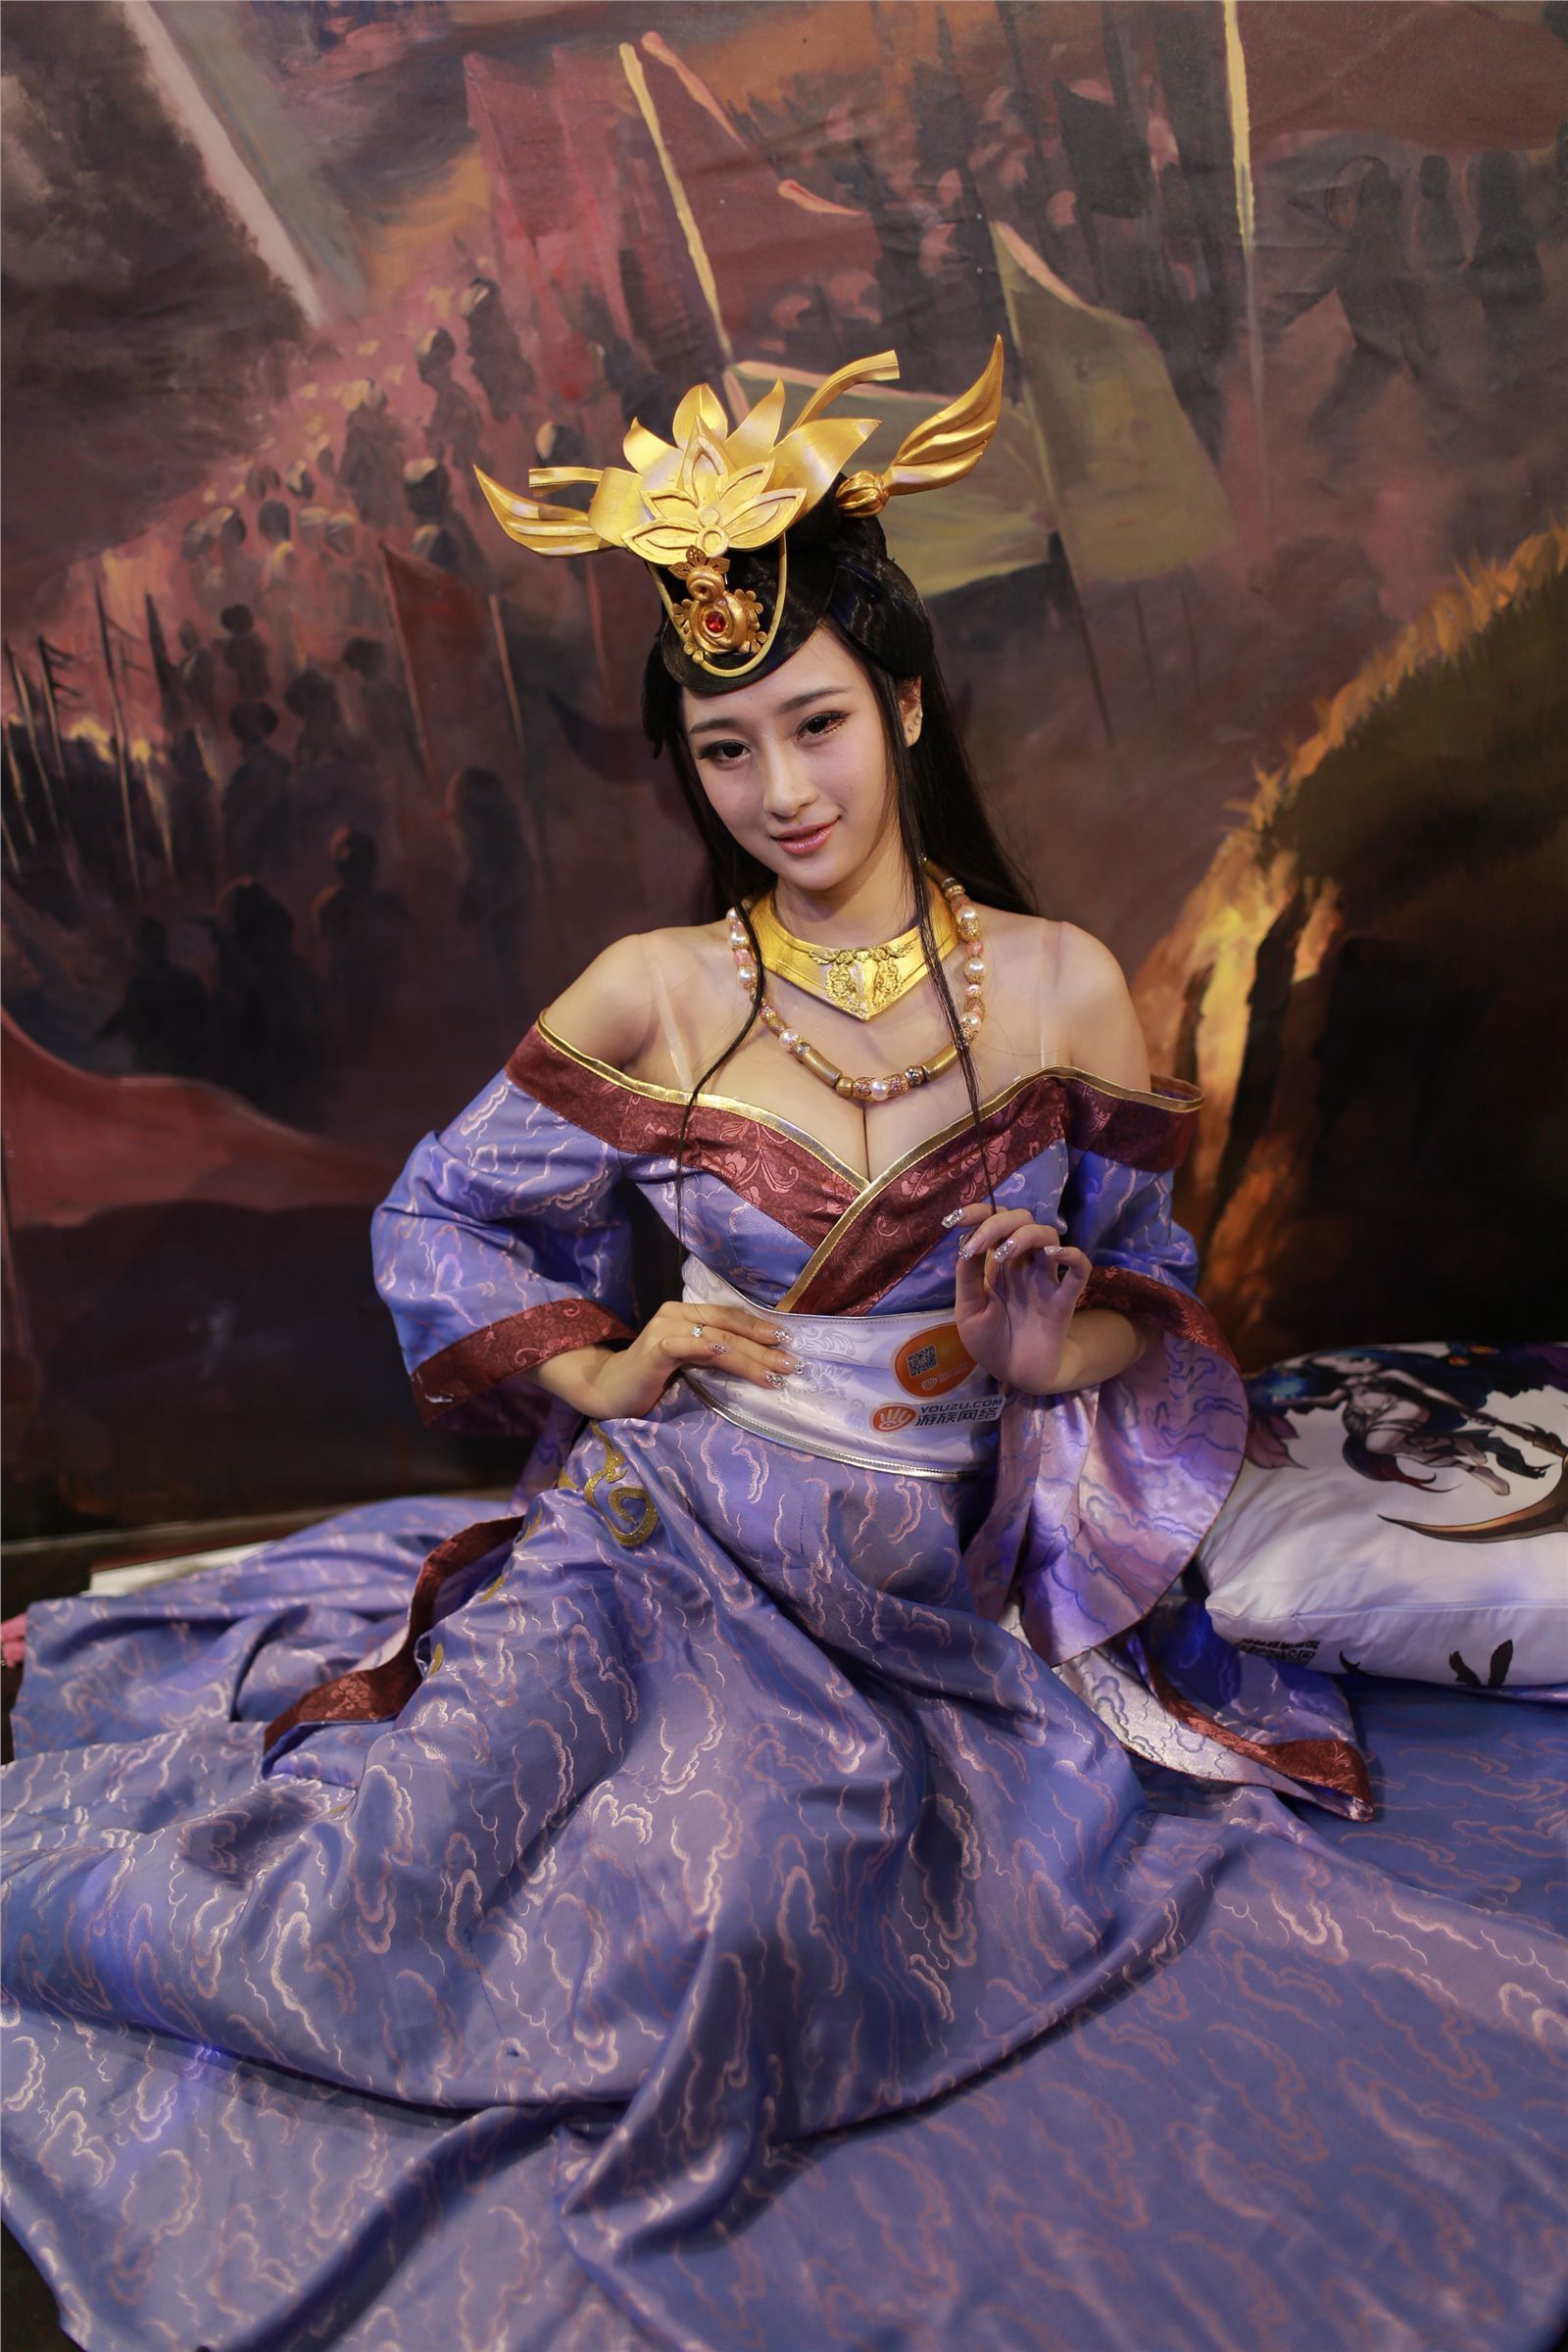 ChinaJoy 2014 Youzu online exhibition stand goddess Chaoqing Collection 2